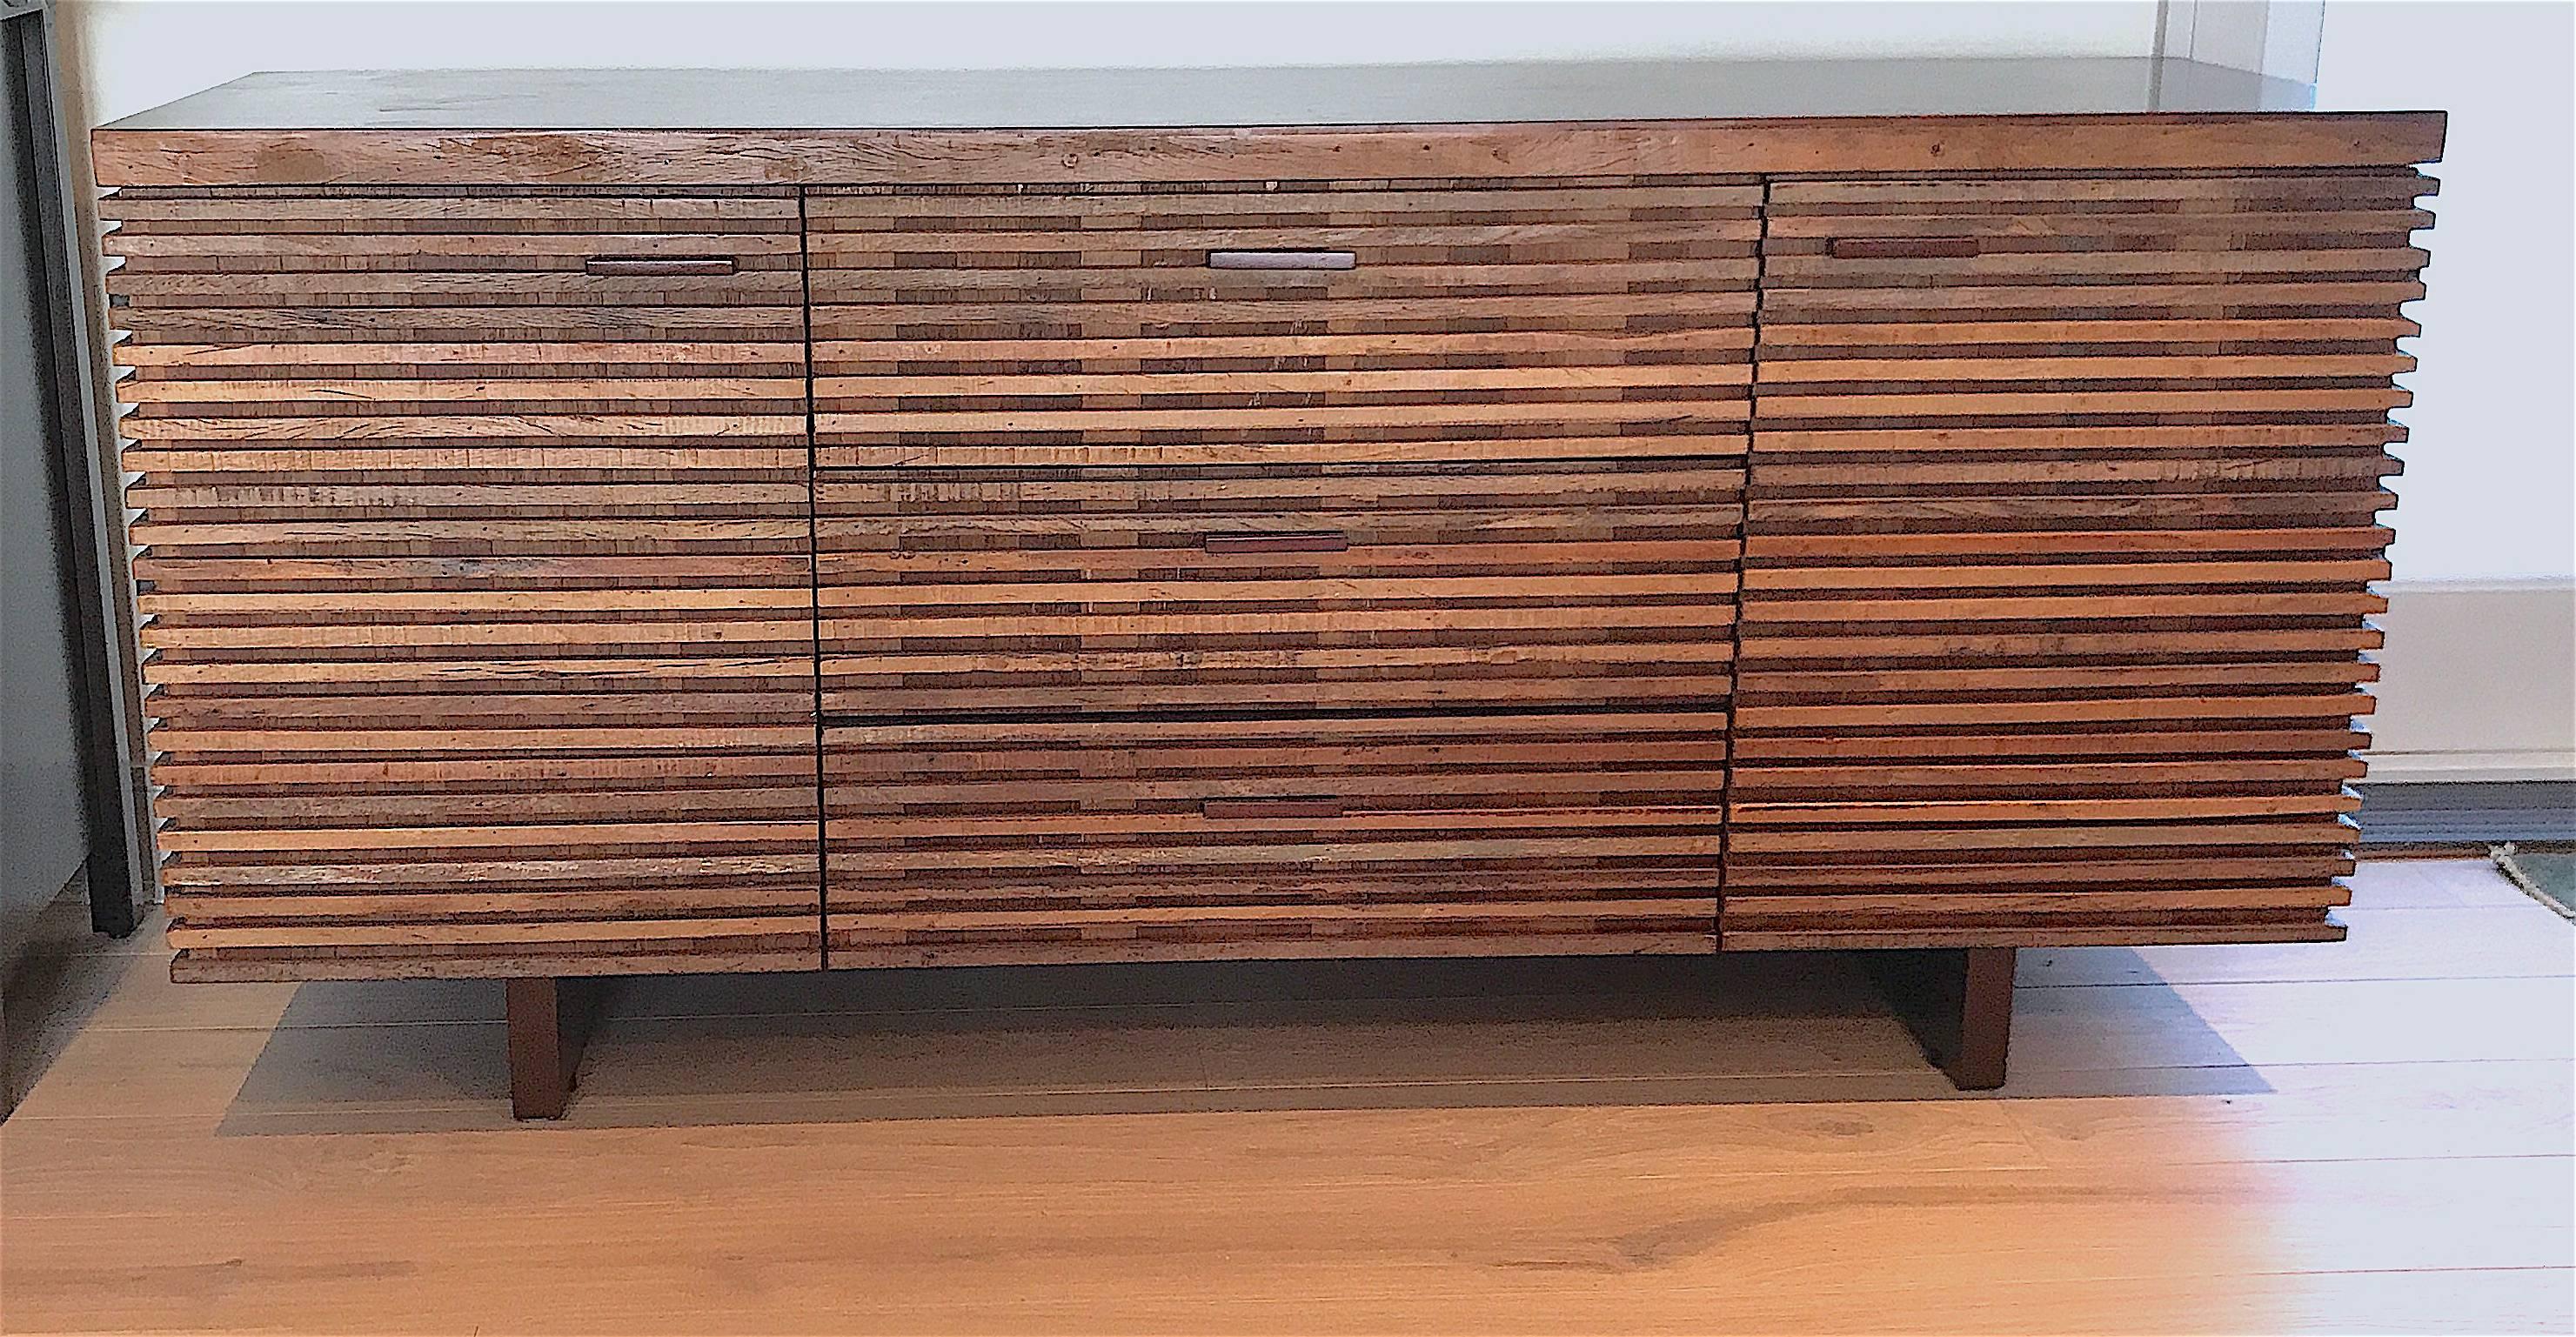 A Rough Luxe Style in Restoration Hardware Style for someone who enjoys living with stylish green sustainable reclaimed solid woods in their environment.
Large outstanding handcrafted Organic Modern Vintage linear solid wood design cabinet chest-